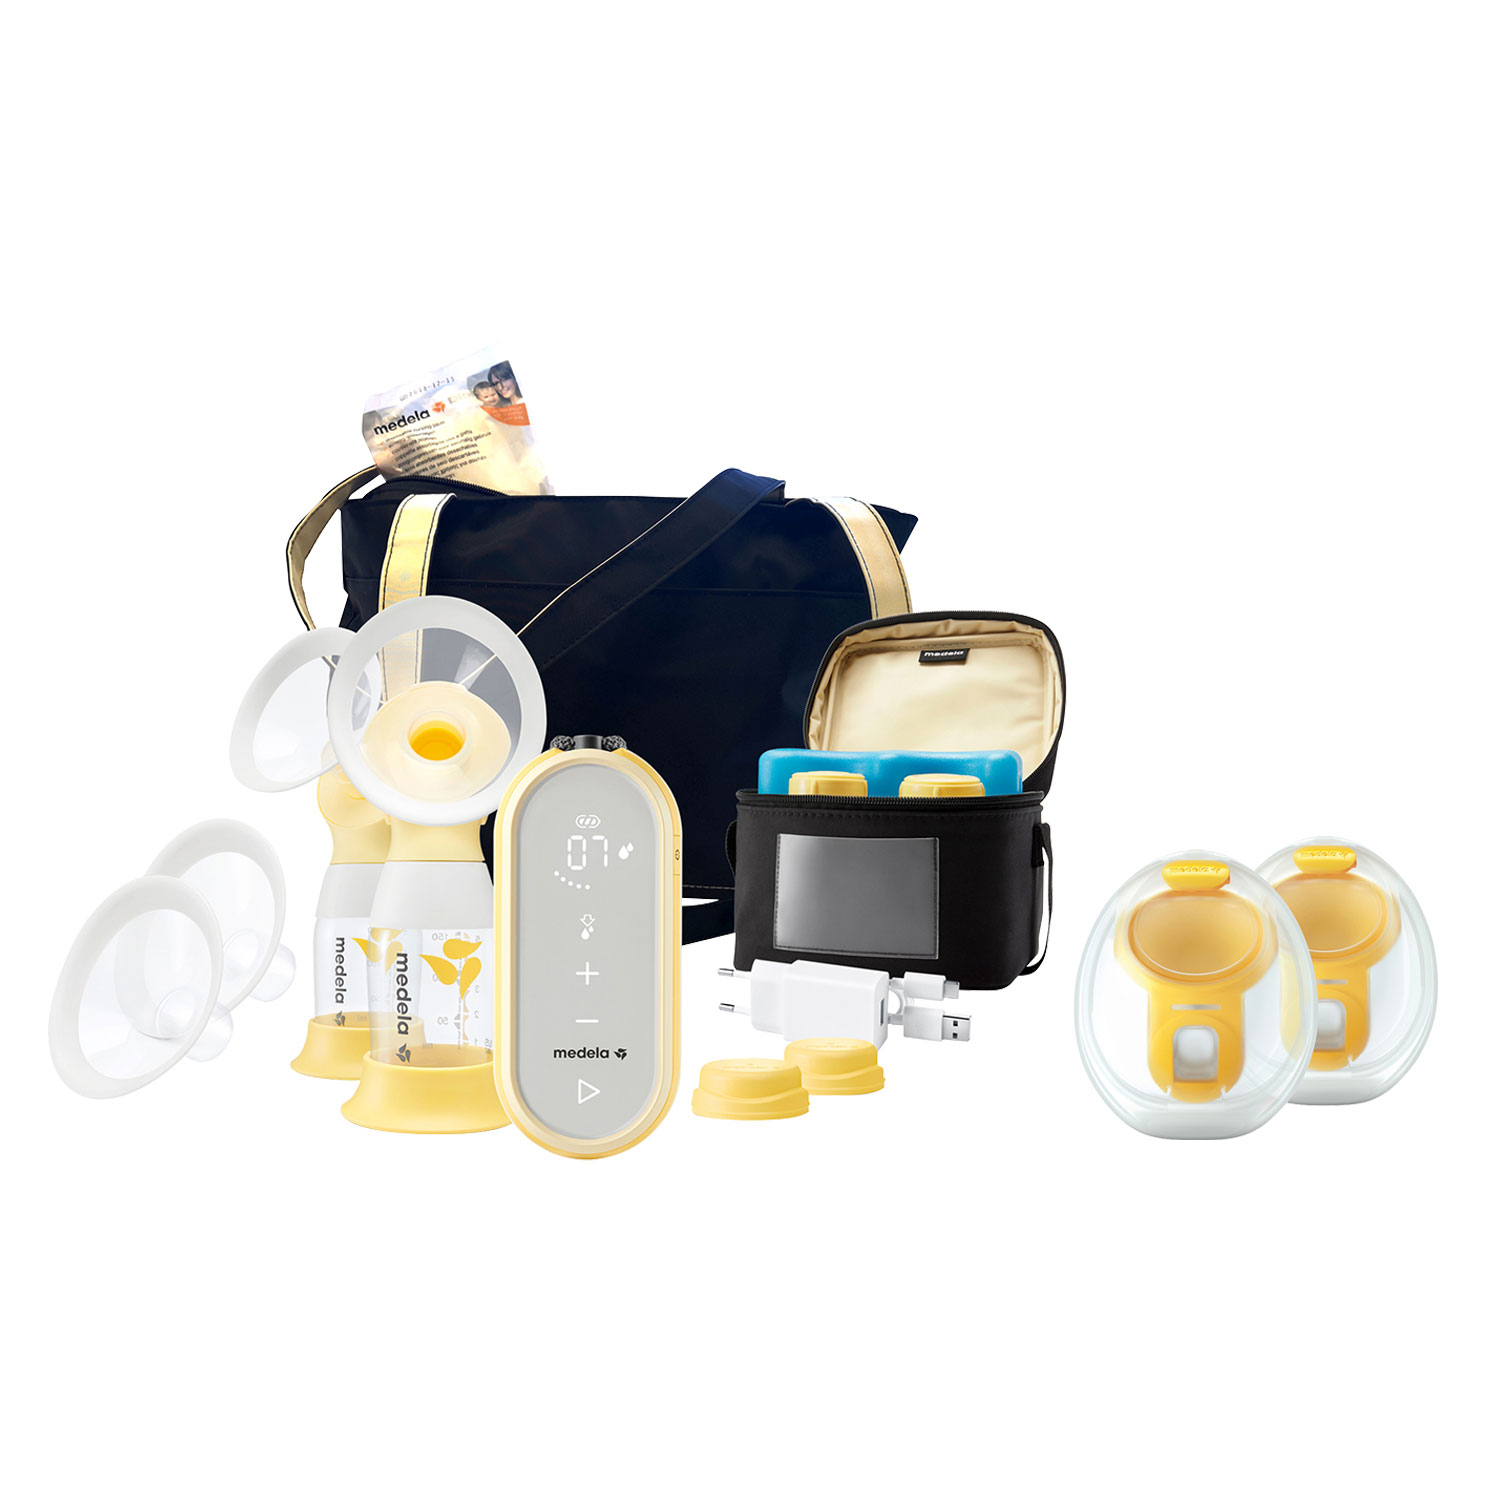 Medela Freestyle Flex Double Electric Breast Pump with Cooler, Carry Bag, & Hands-free Collection Cups